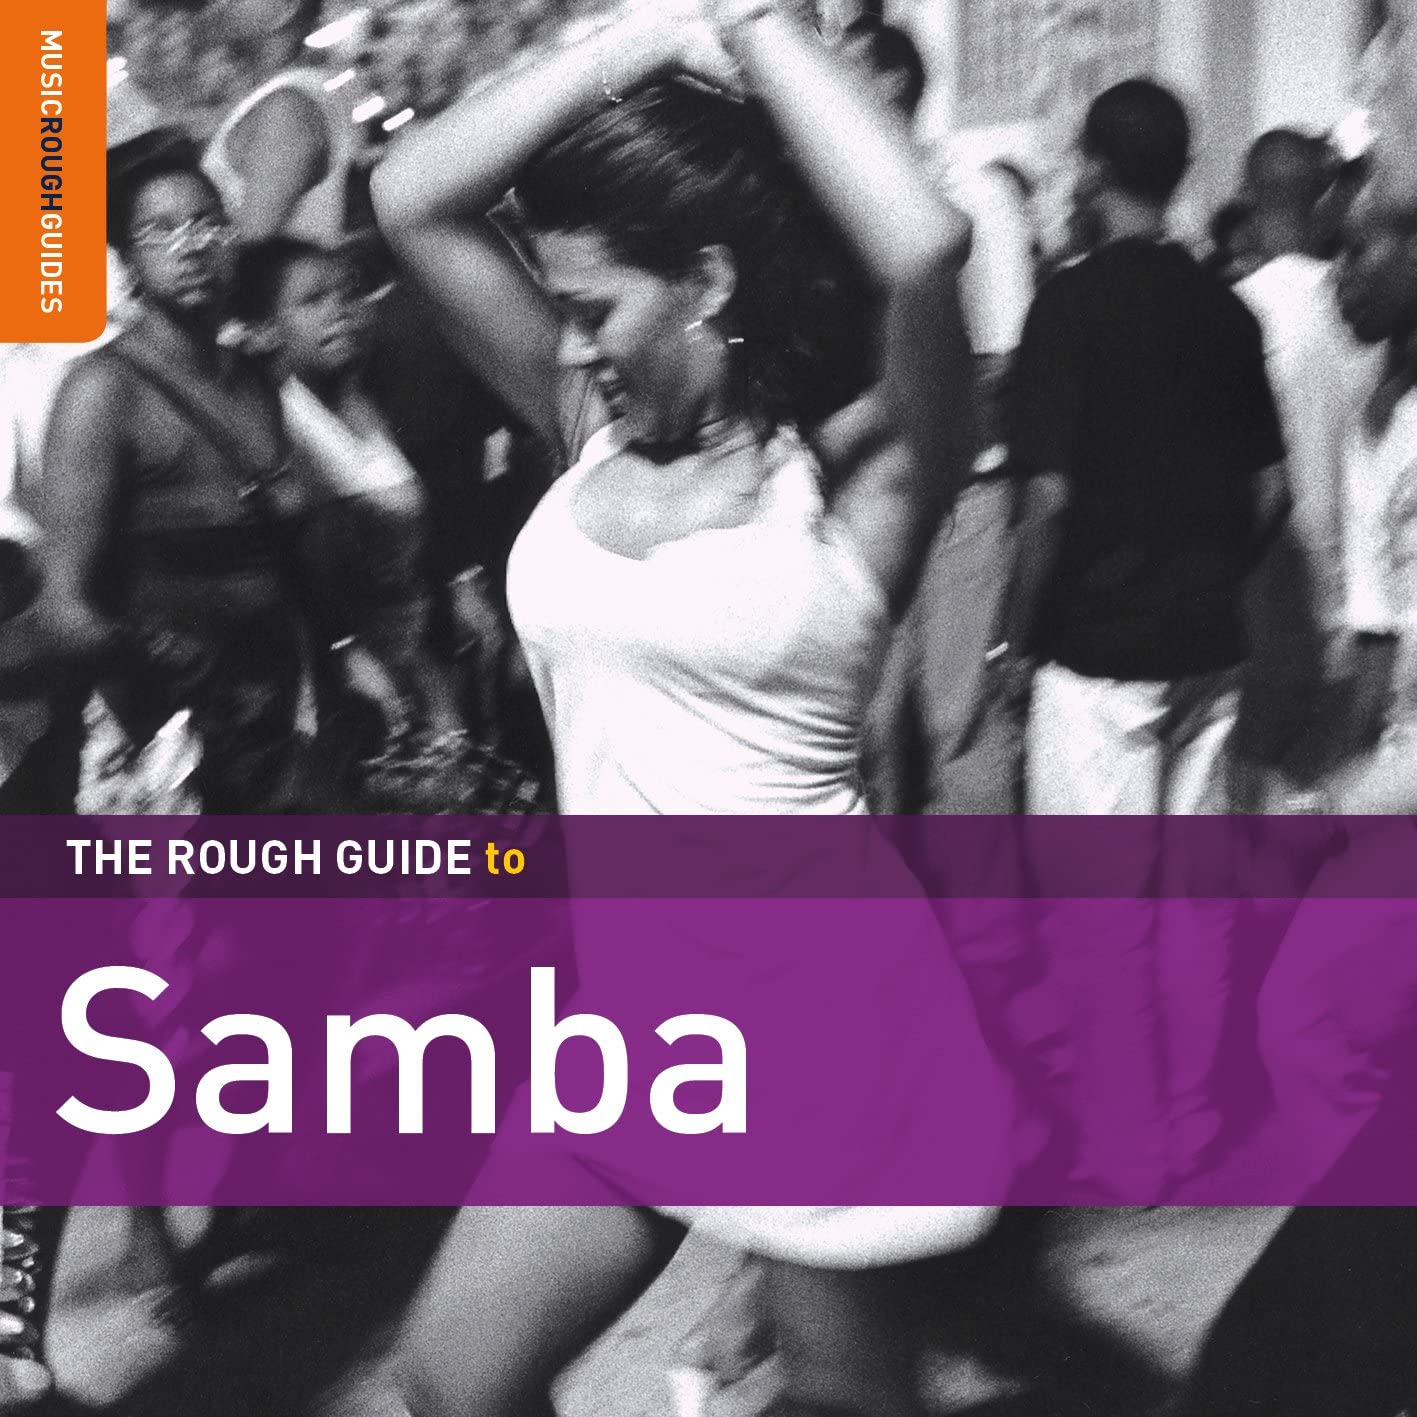 Samba is the dancing spirit and rhythm of life in Brazil. This Rough Guide on Vinyl features the best of old and new